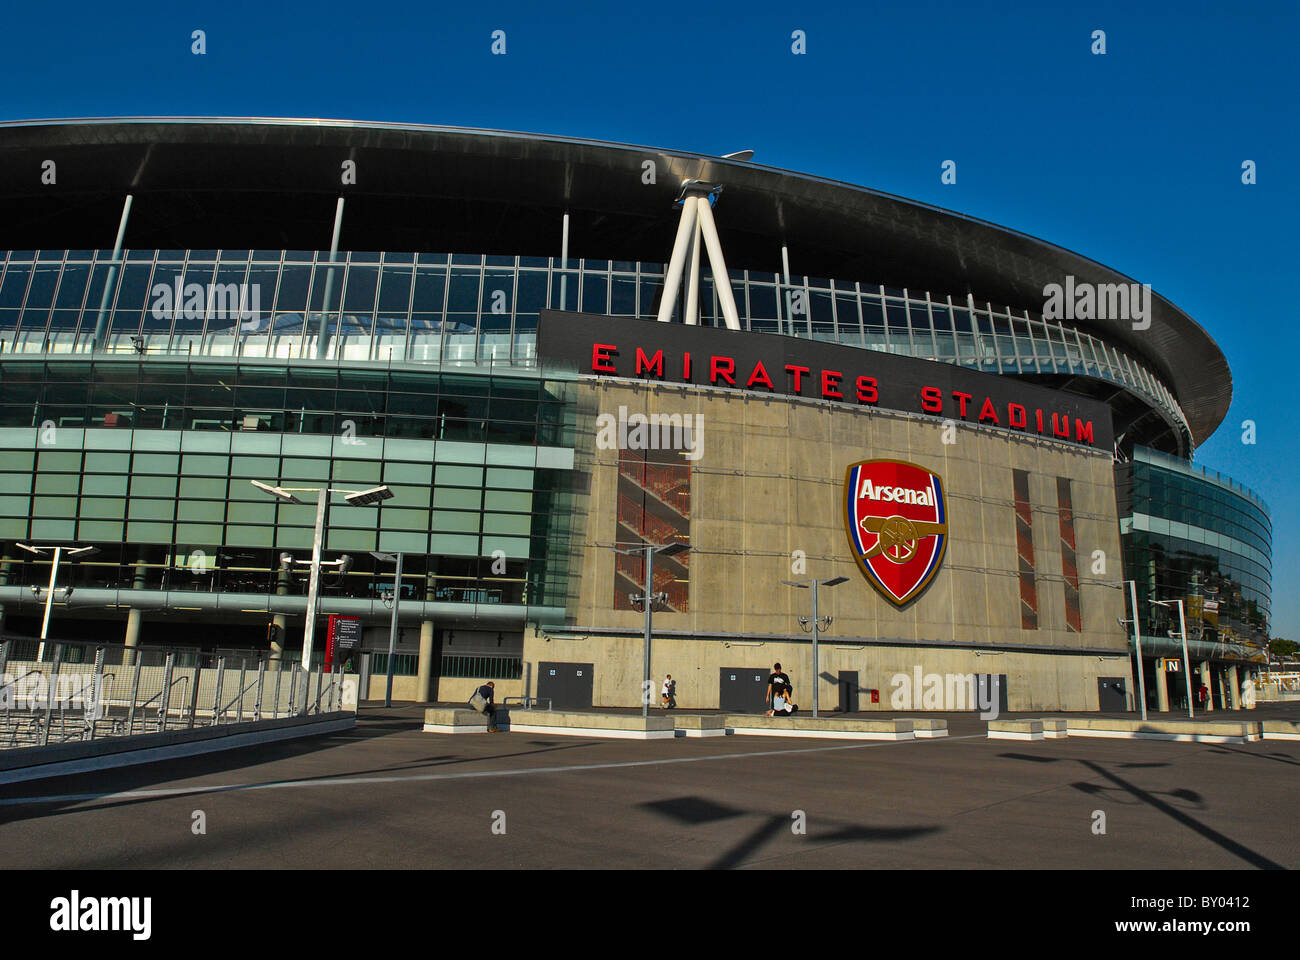 The Emirates Stadium in Ashburton Grove, north London  is the home of Arsenal Football Club. The stadium opened in July 2006. Stock Photo